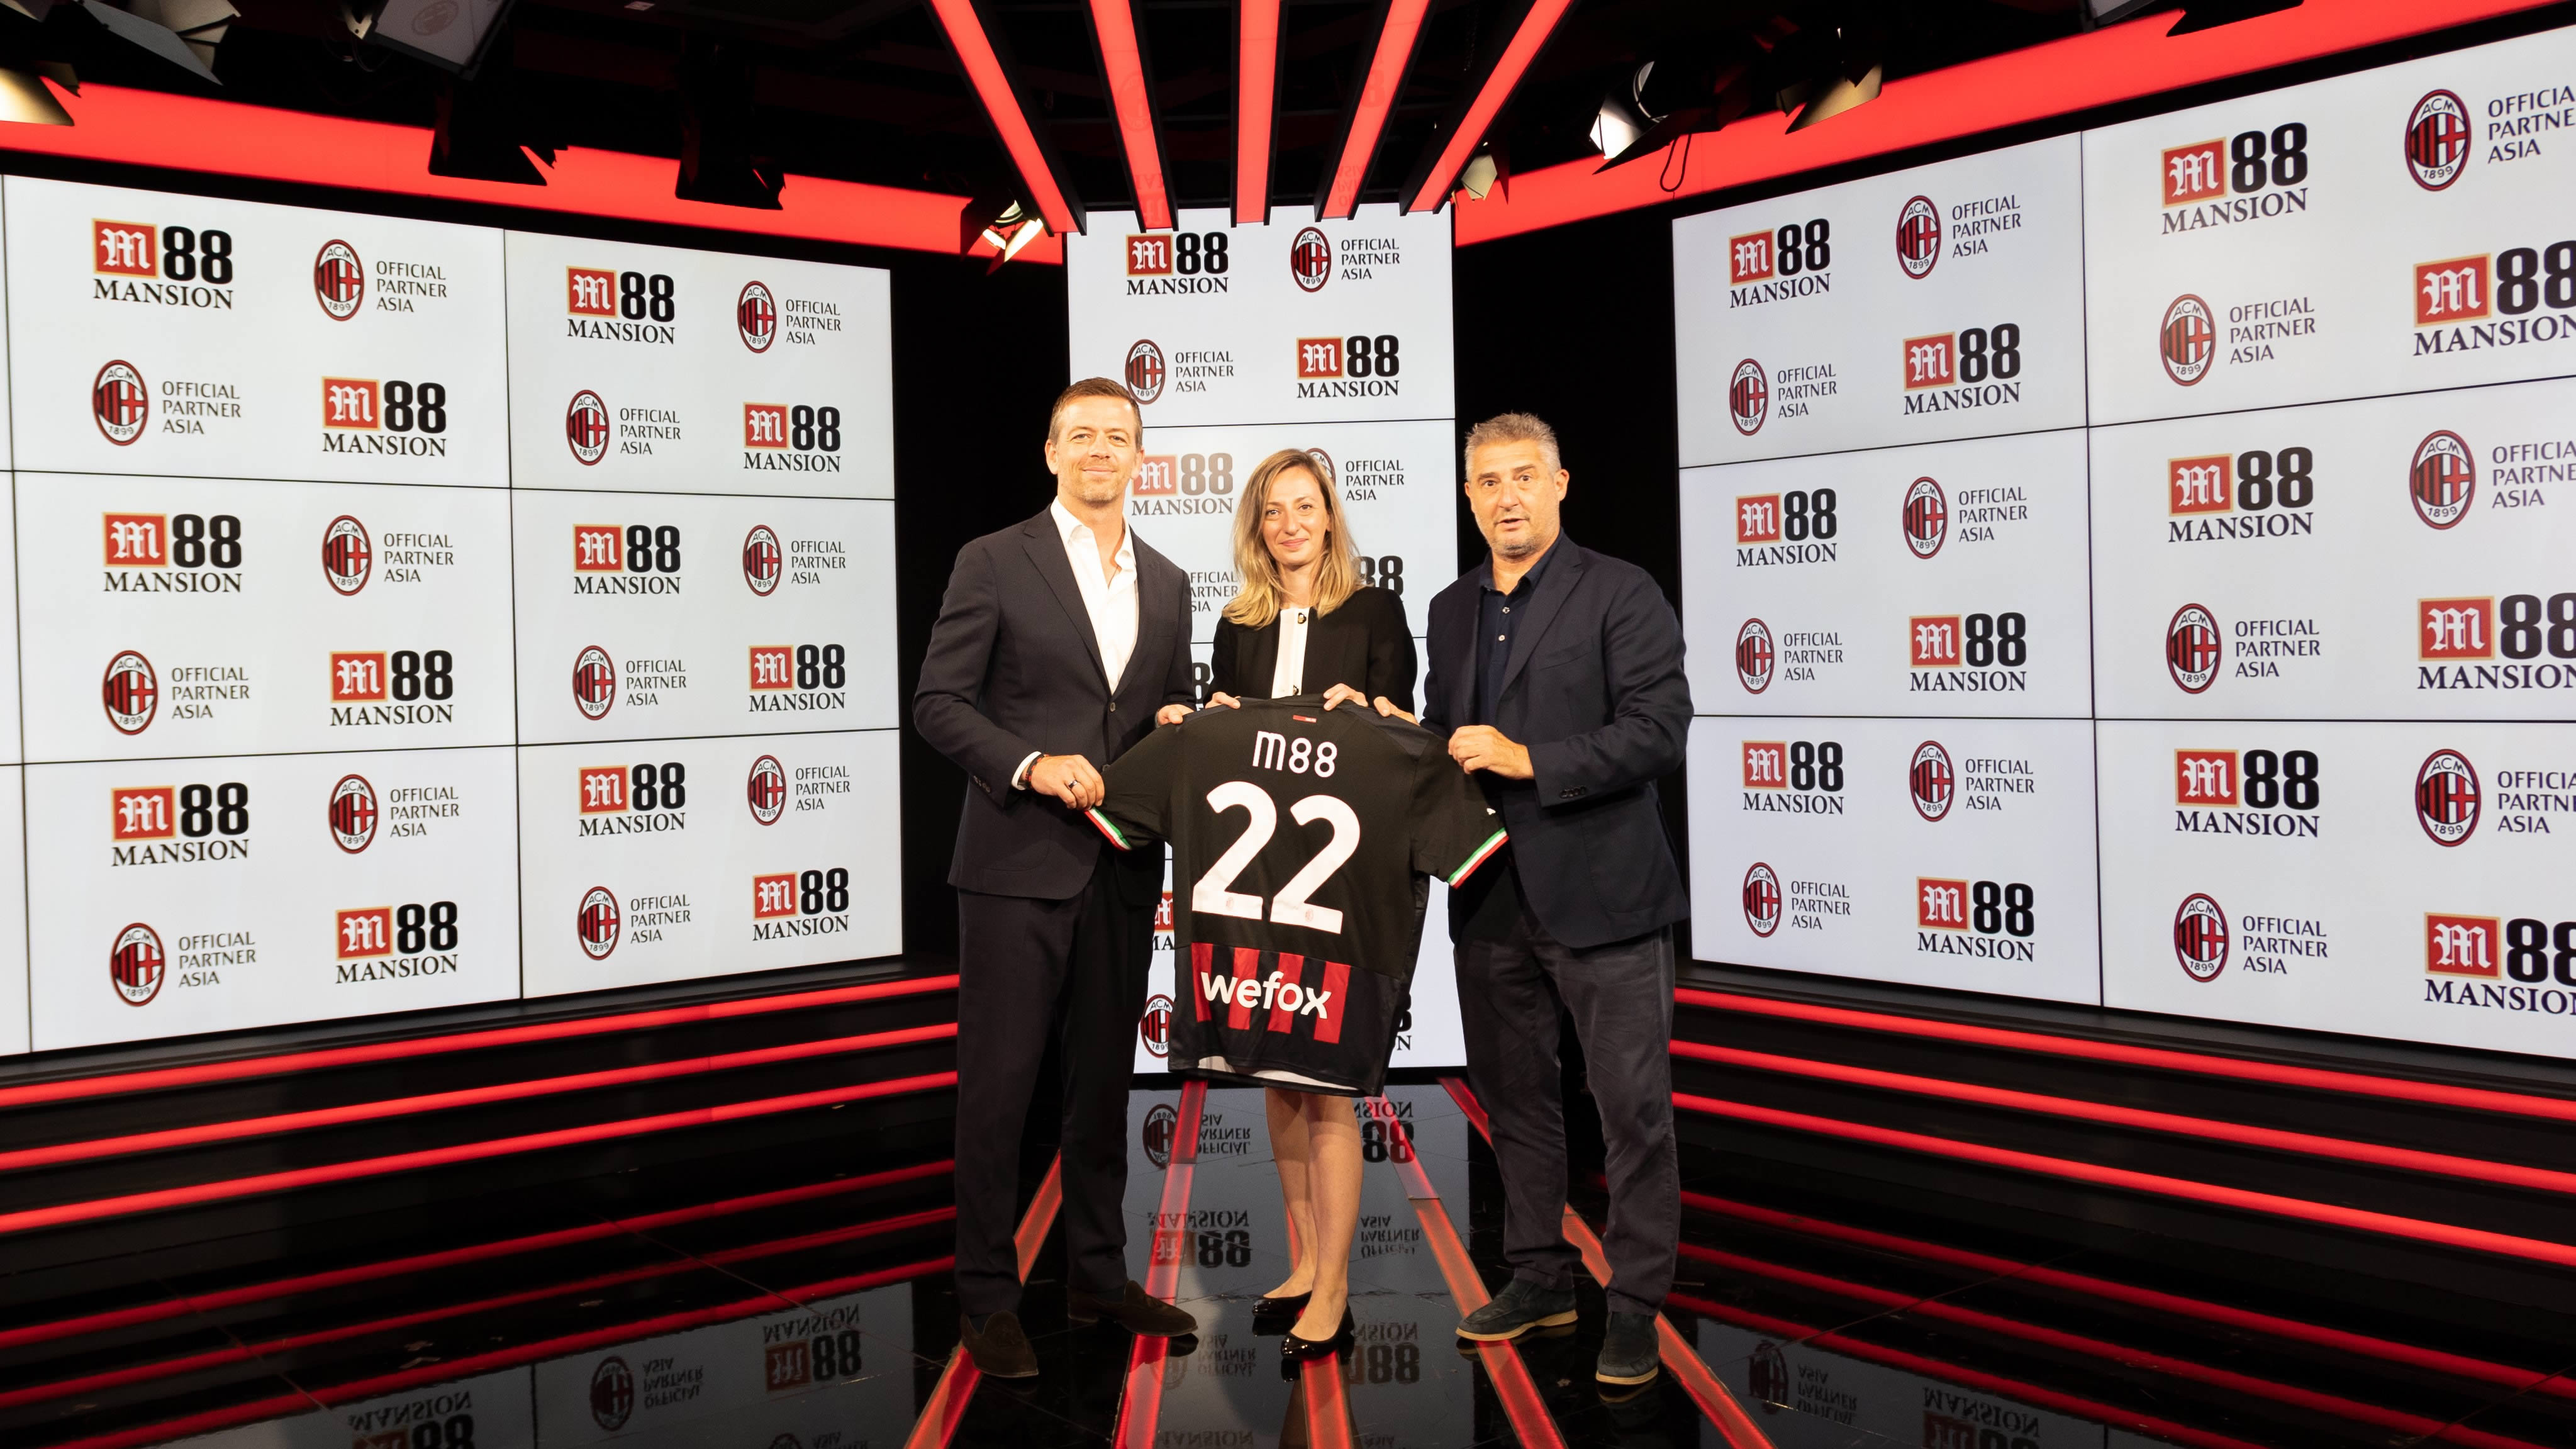 AC Milan signs M88 Mansion as regional poker and casino partner; to launch dedicated gaming portal in Asia